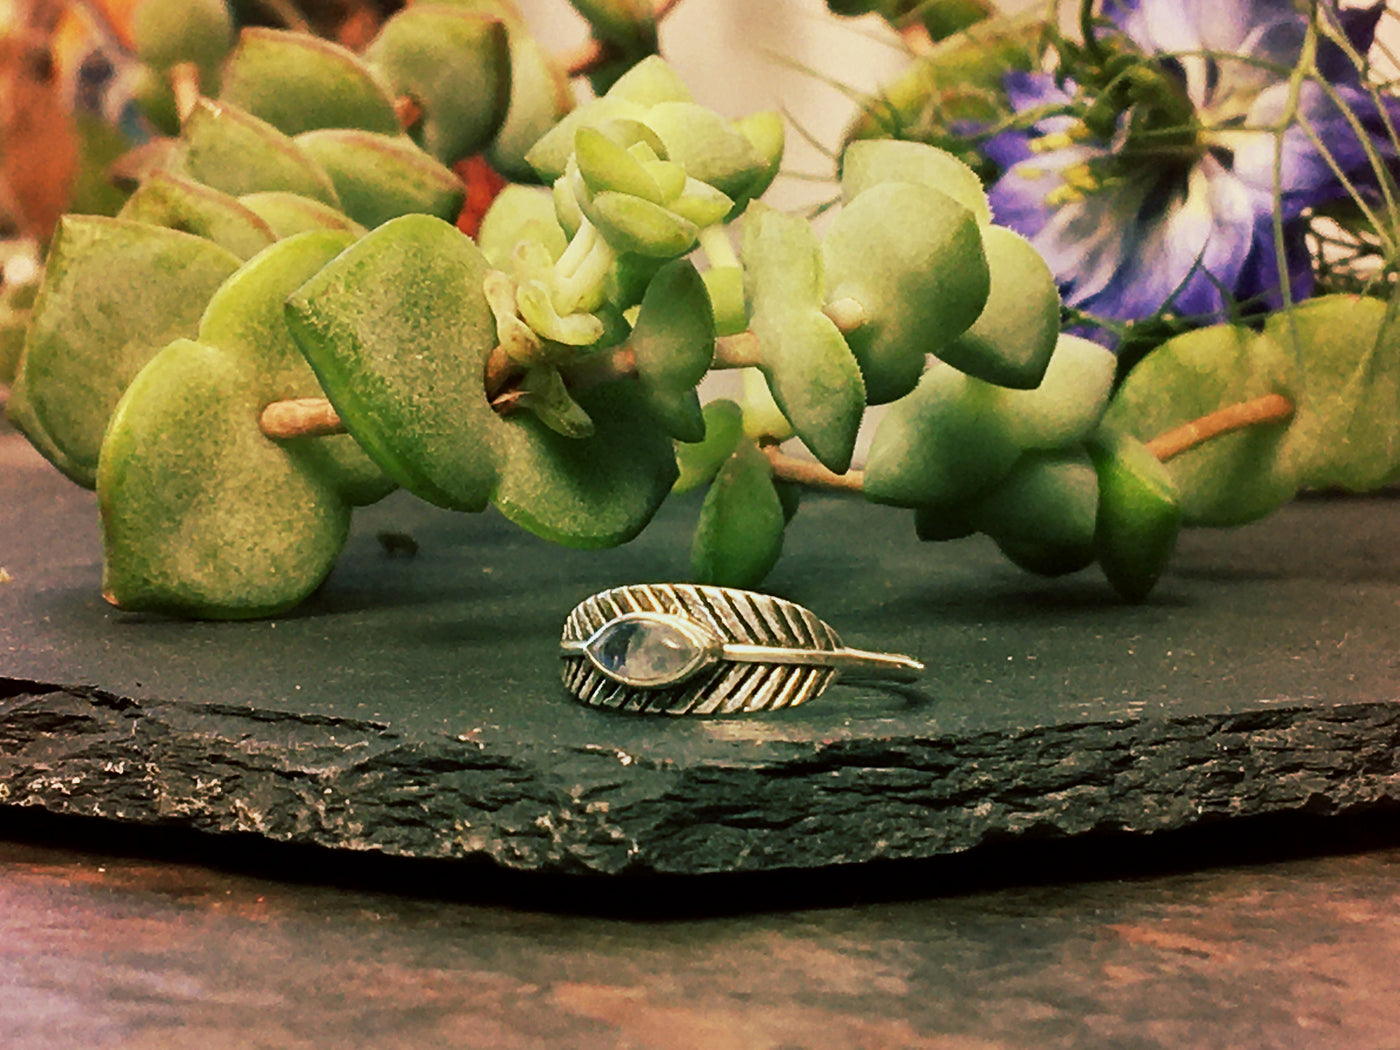 Silver Masika Feather Ring - ForageDesign